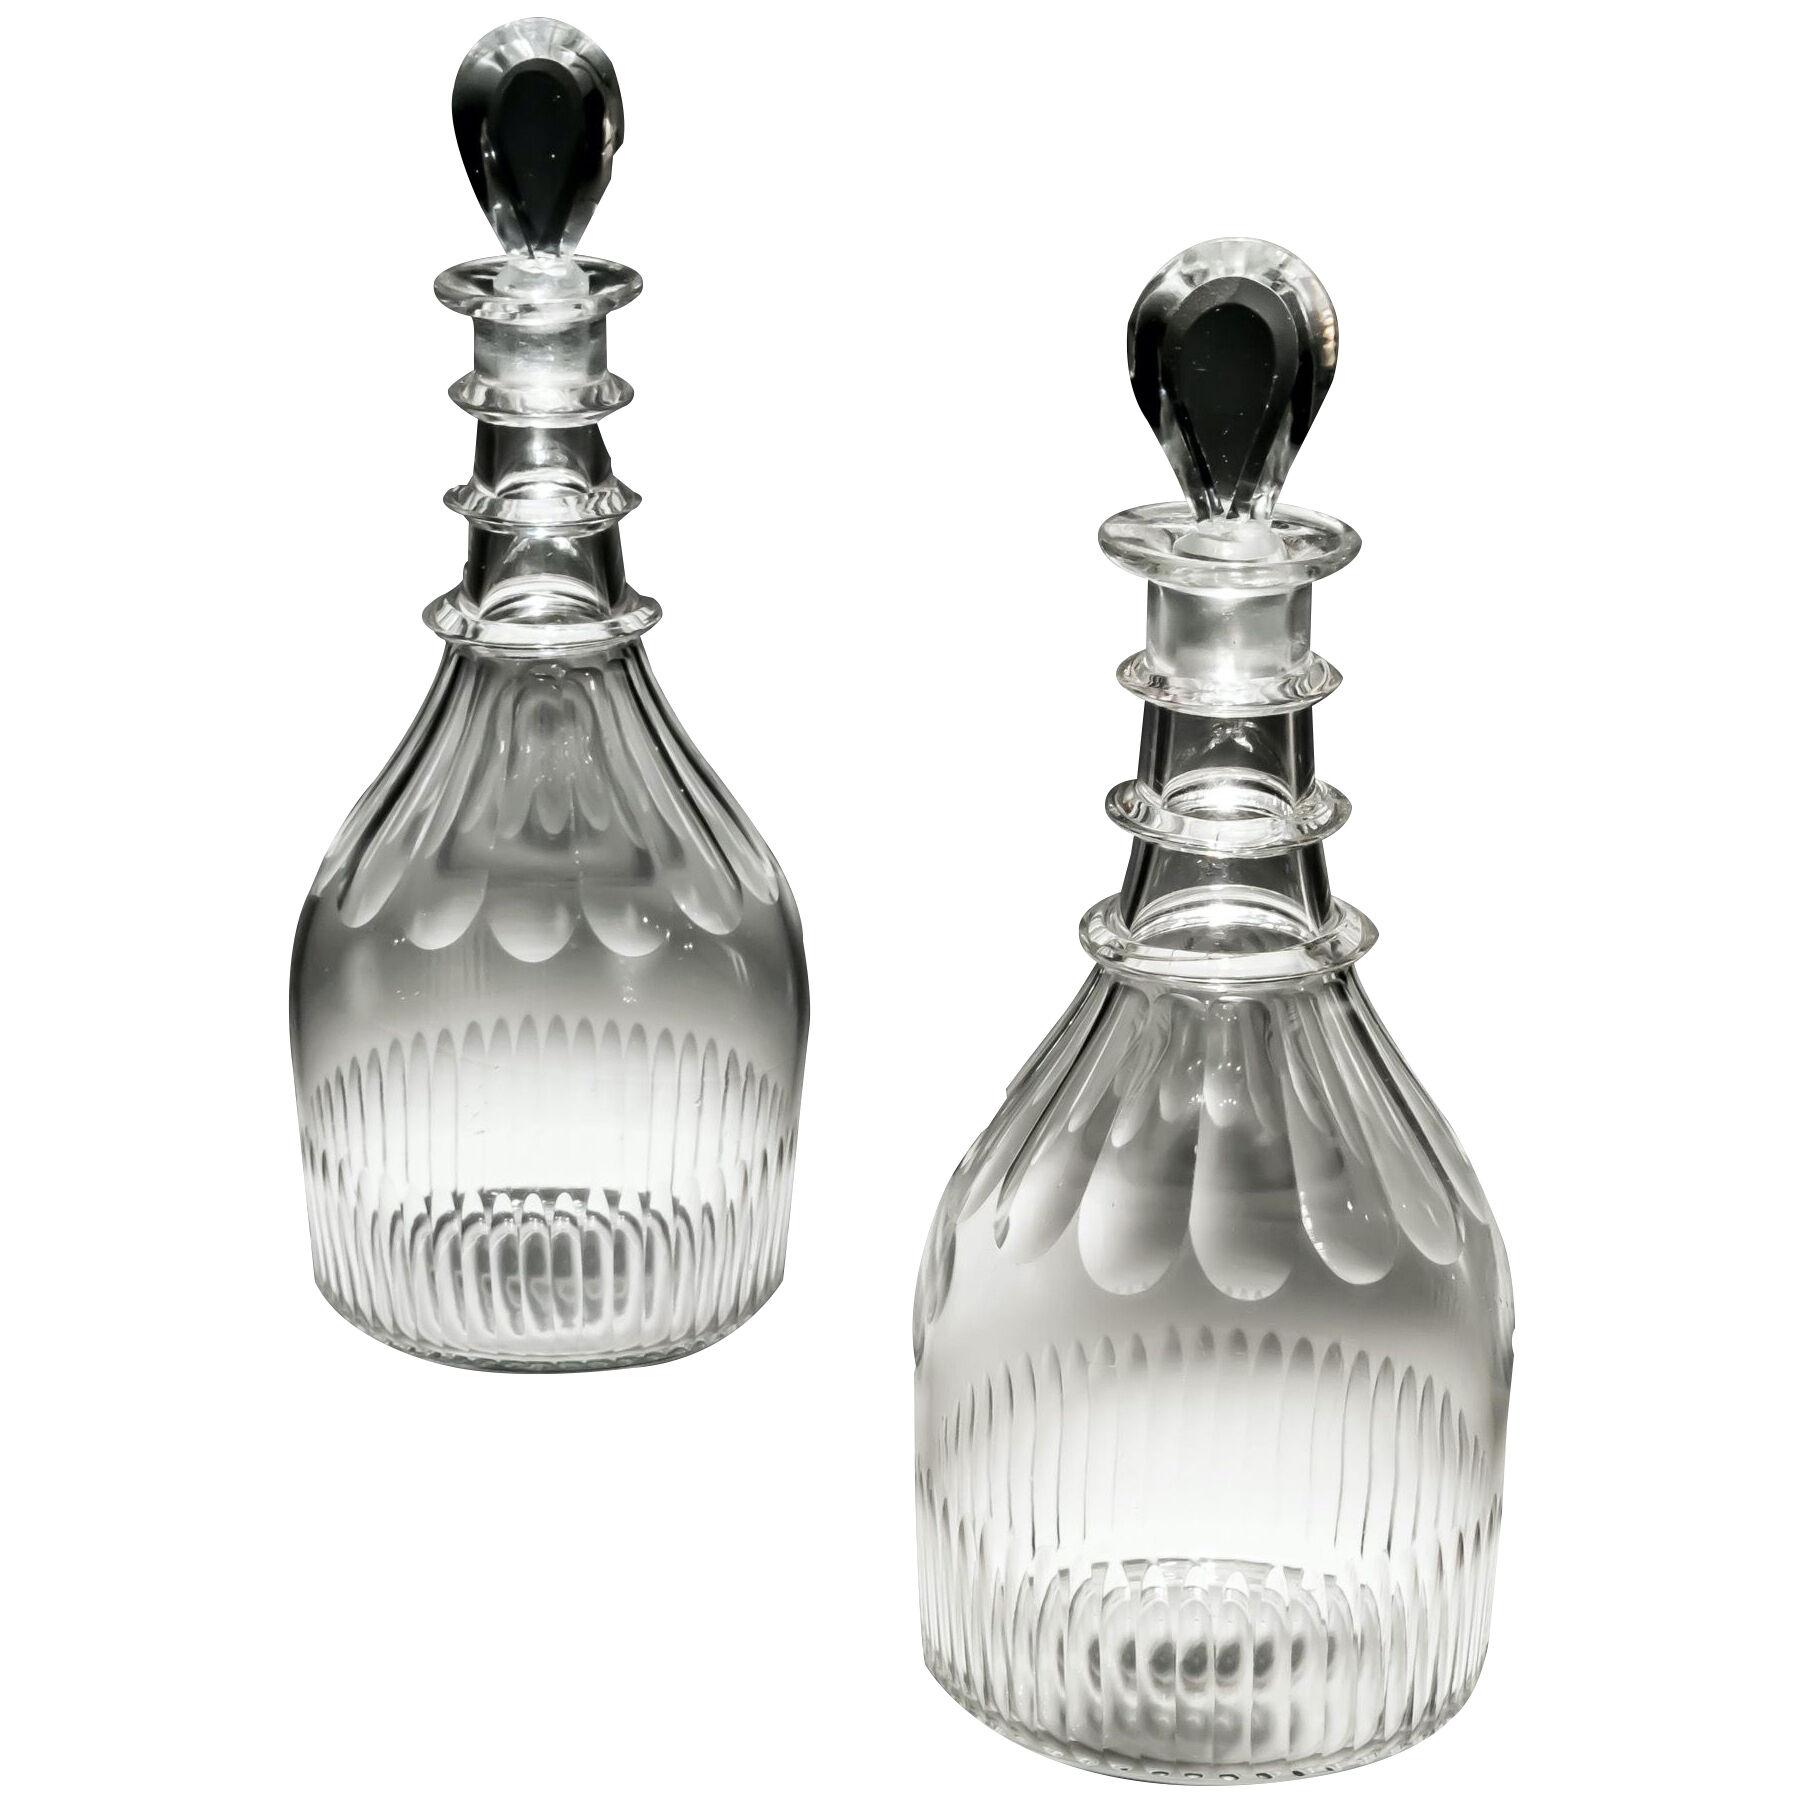 A Pair of Slice & Flute Cut Decanters